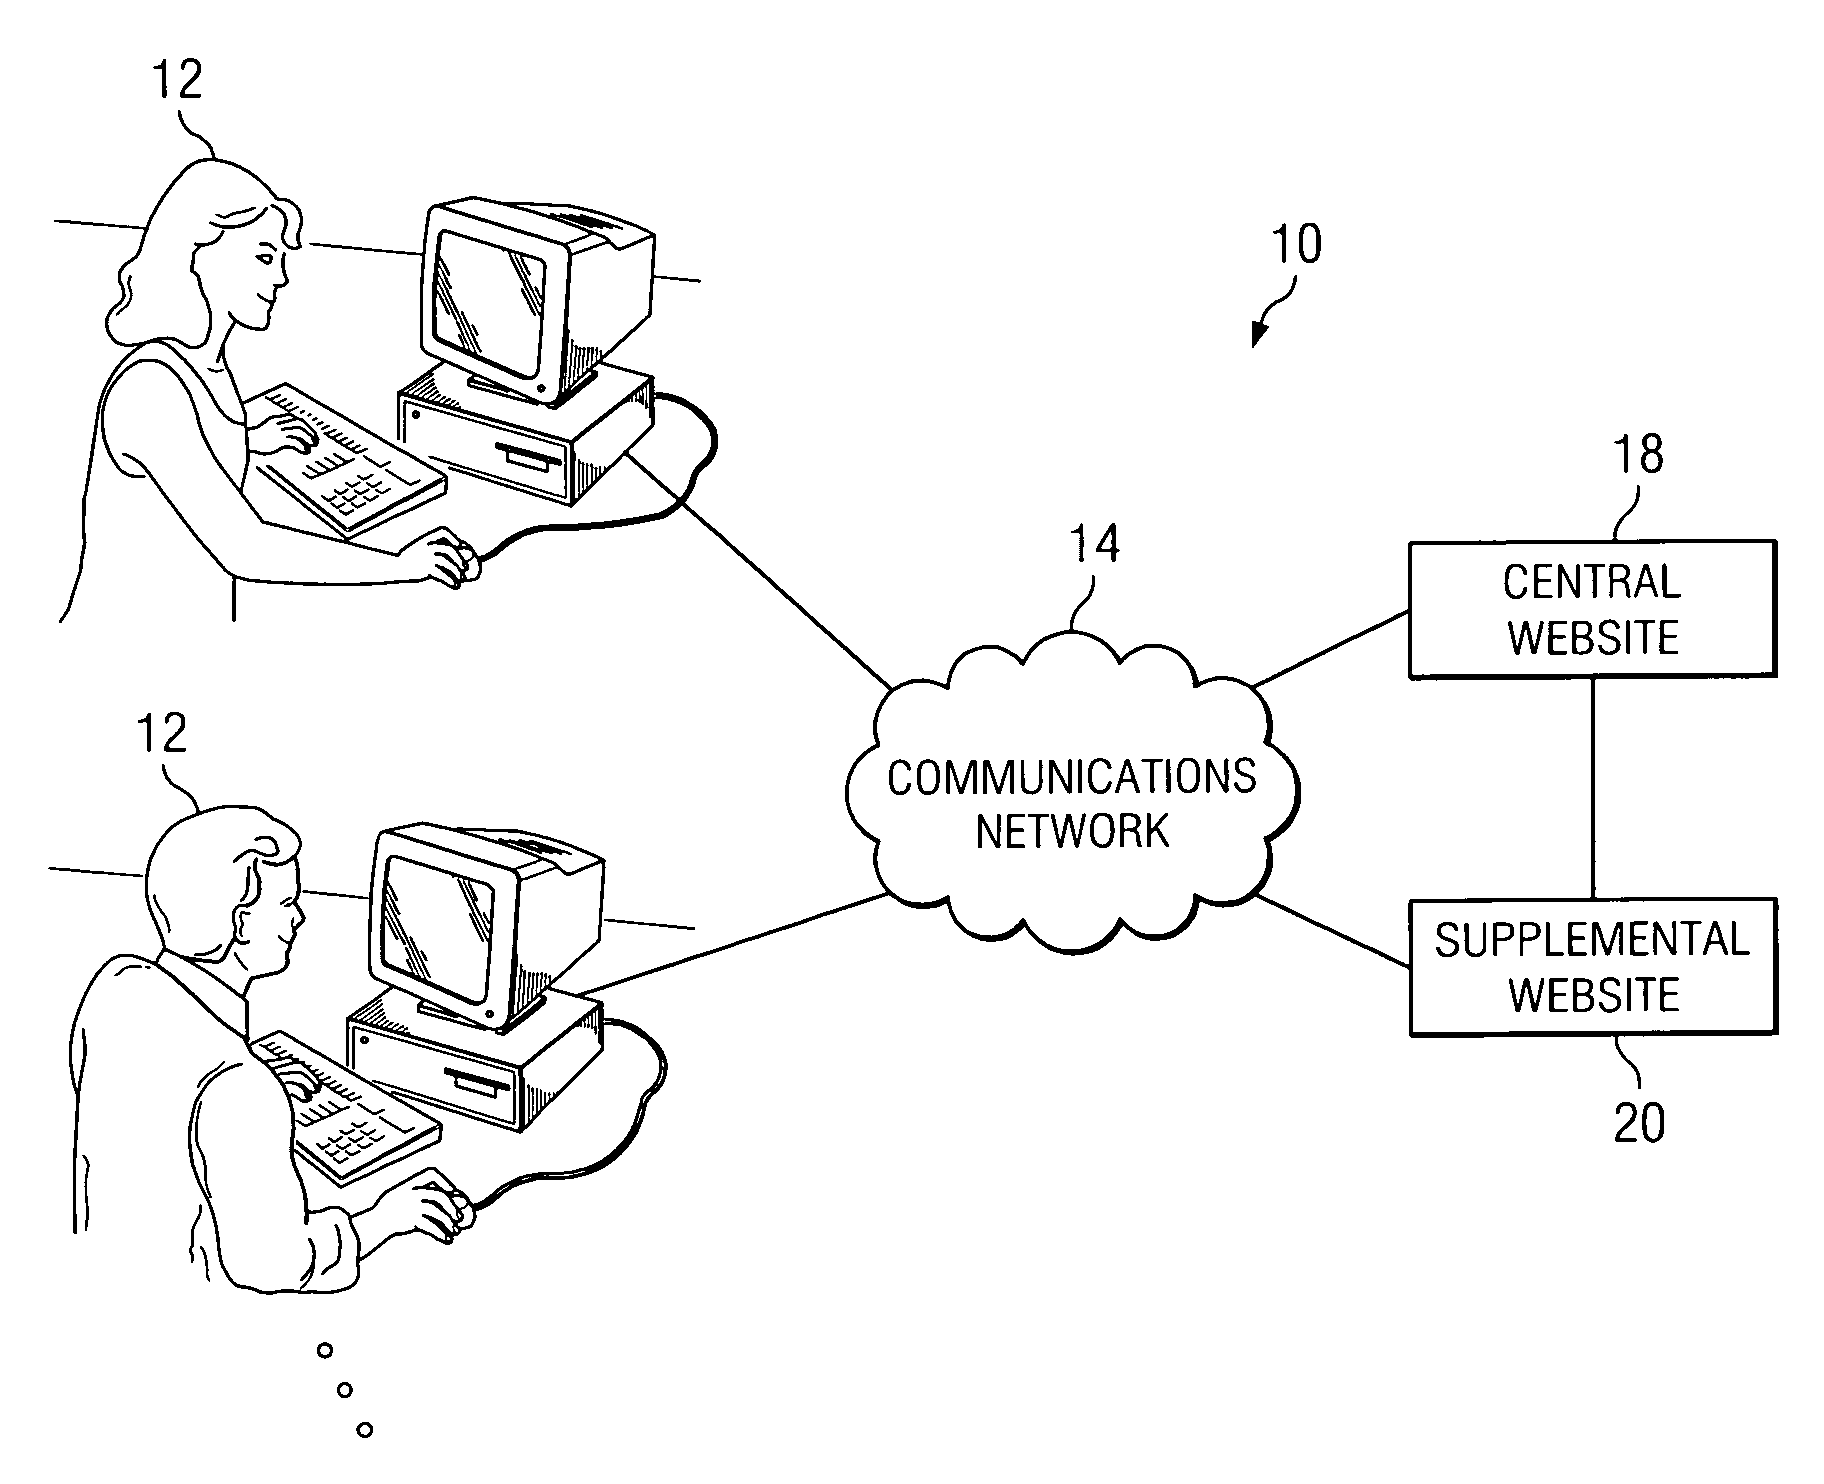 System and method for providing a search feature in a network environment